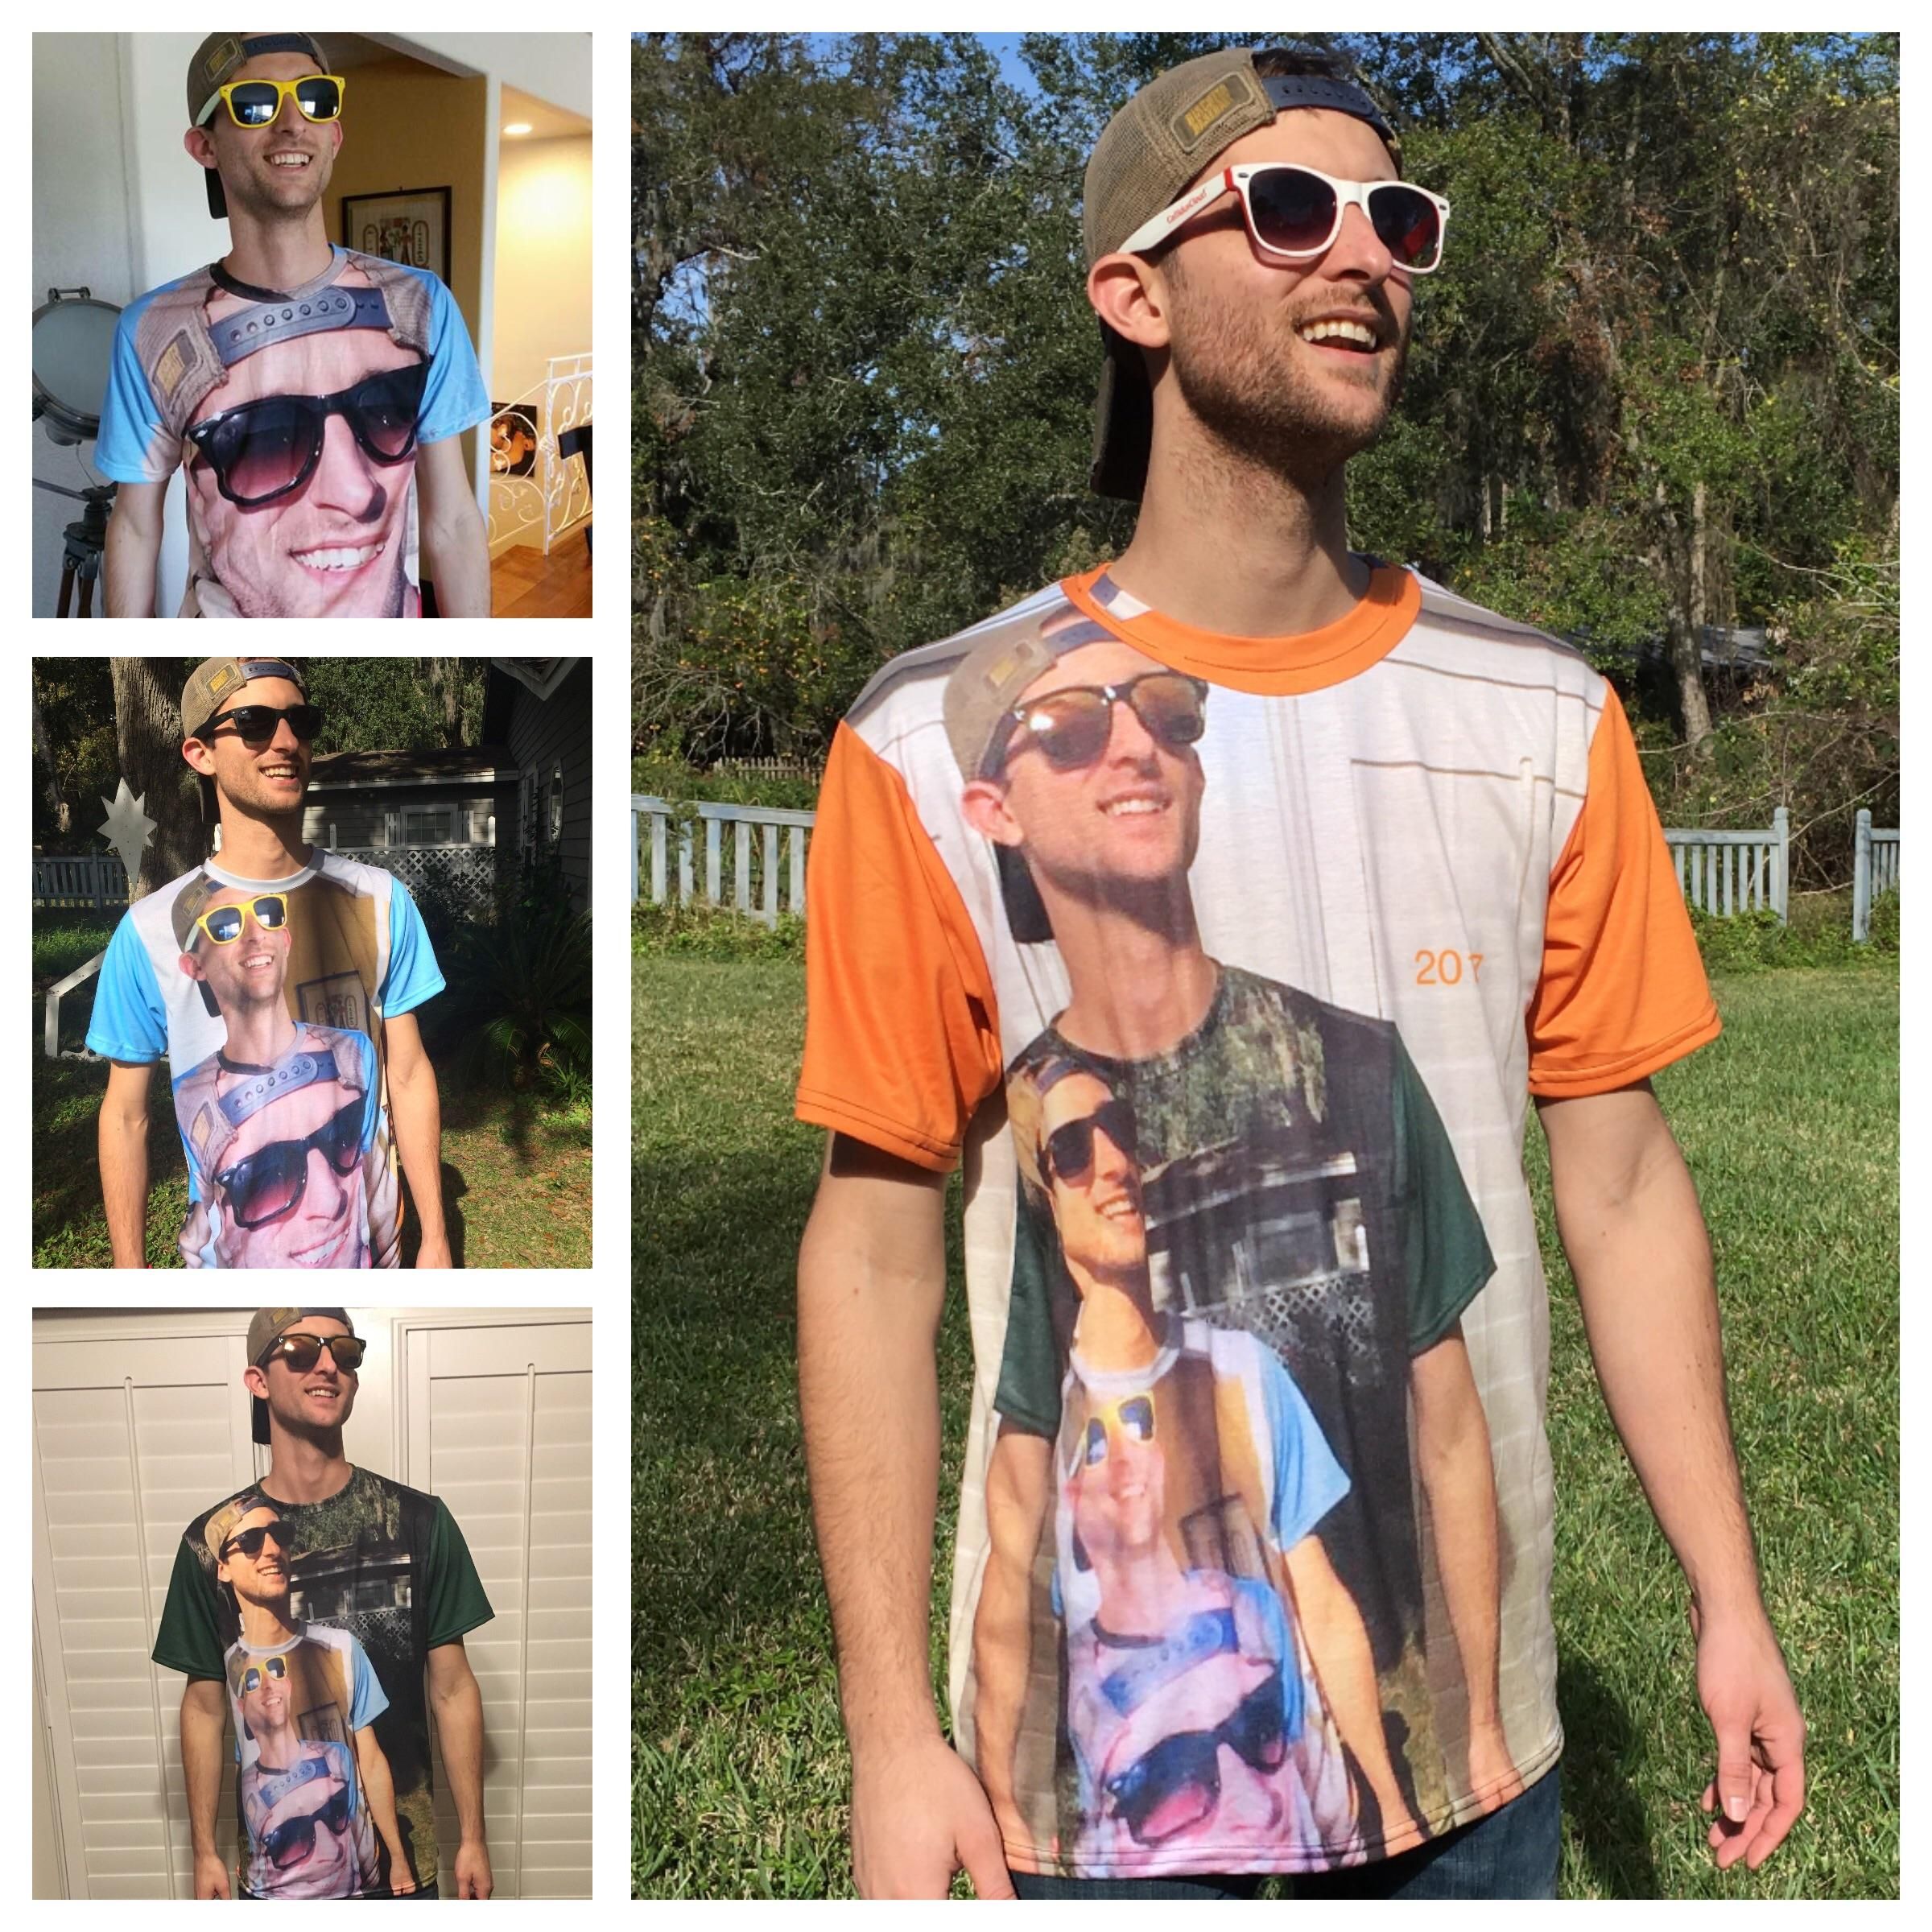 "Shirtception" - my favorite gift every year from my brother. We're now at level 4.